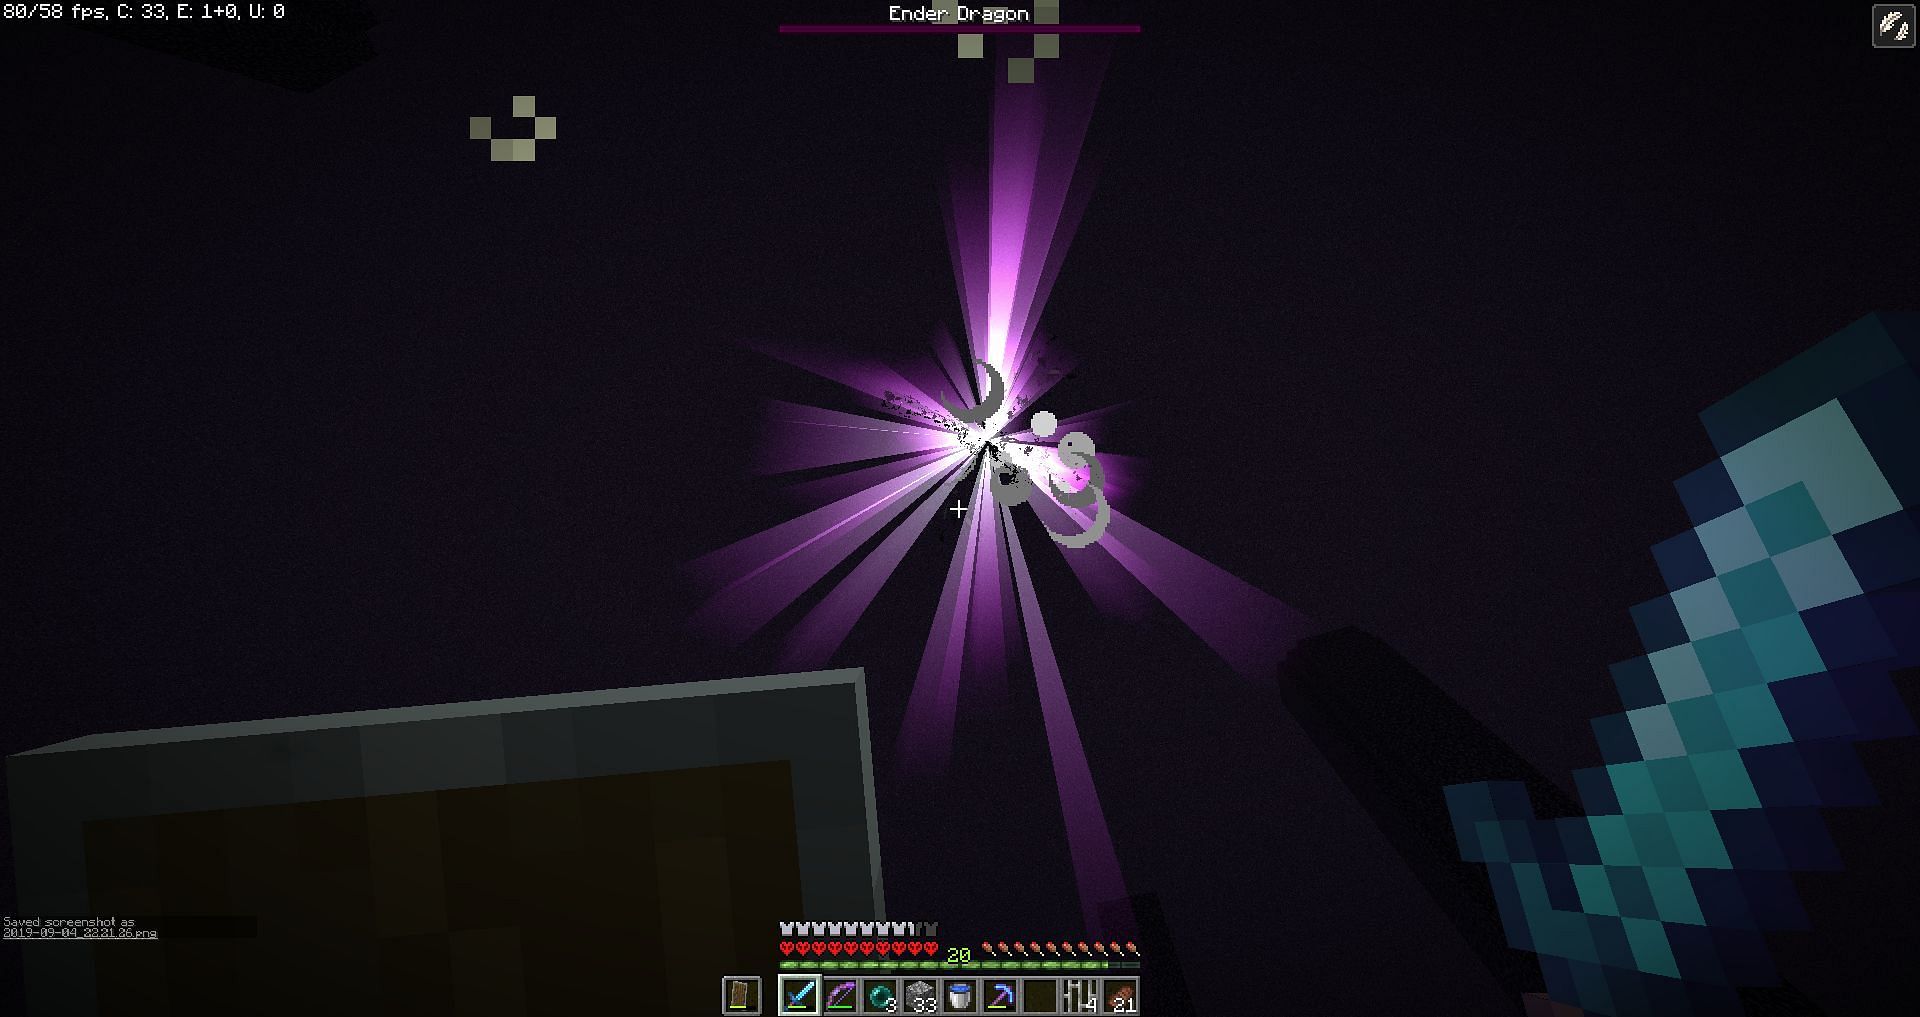 The End achievement is given when the Ender Dragon is killed (Image via Minecraft)